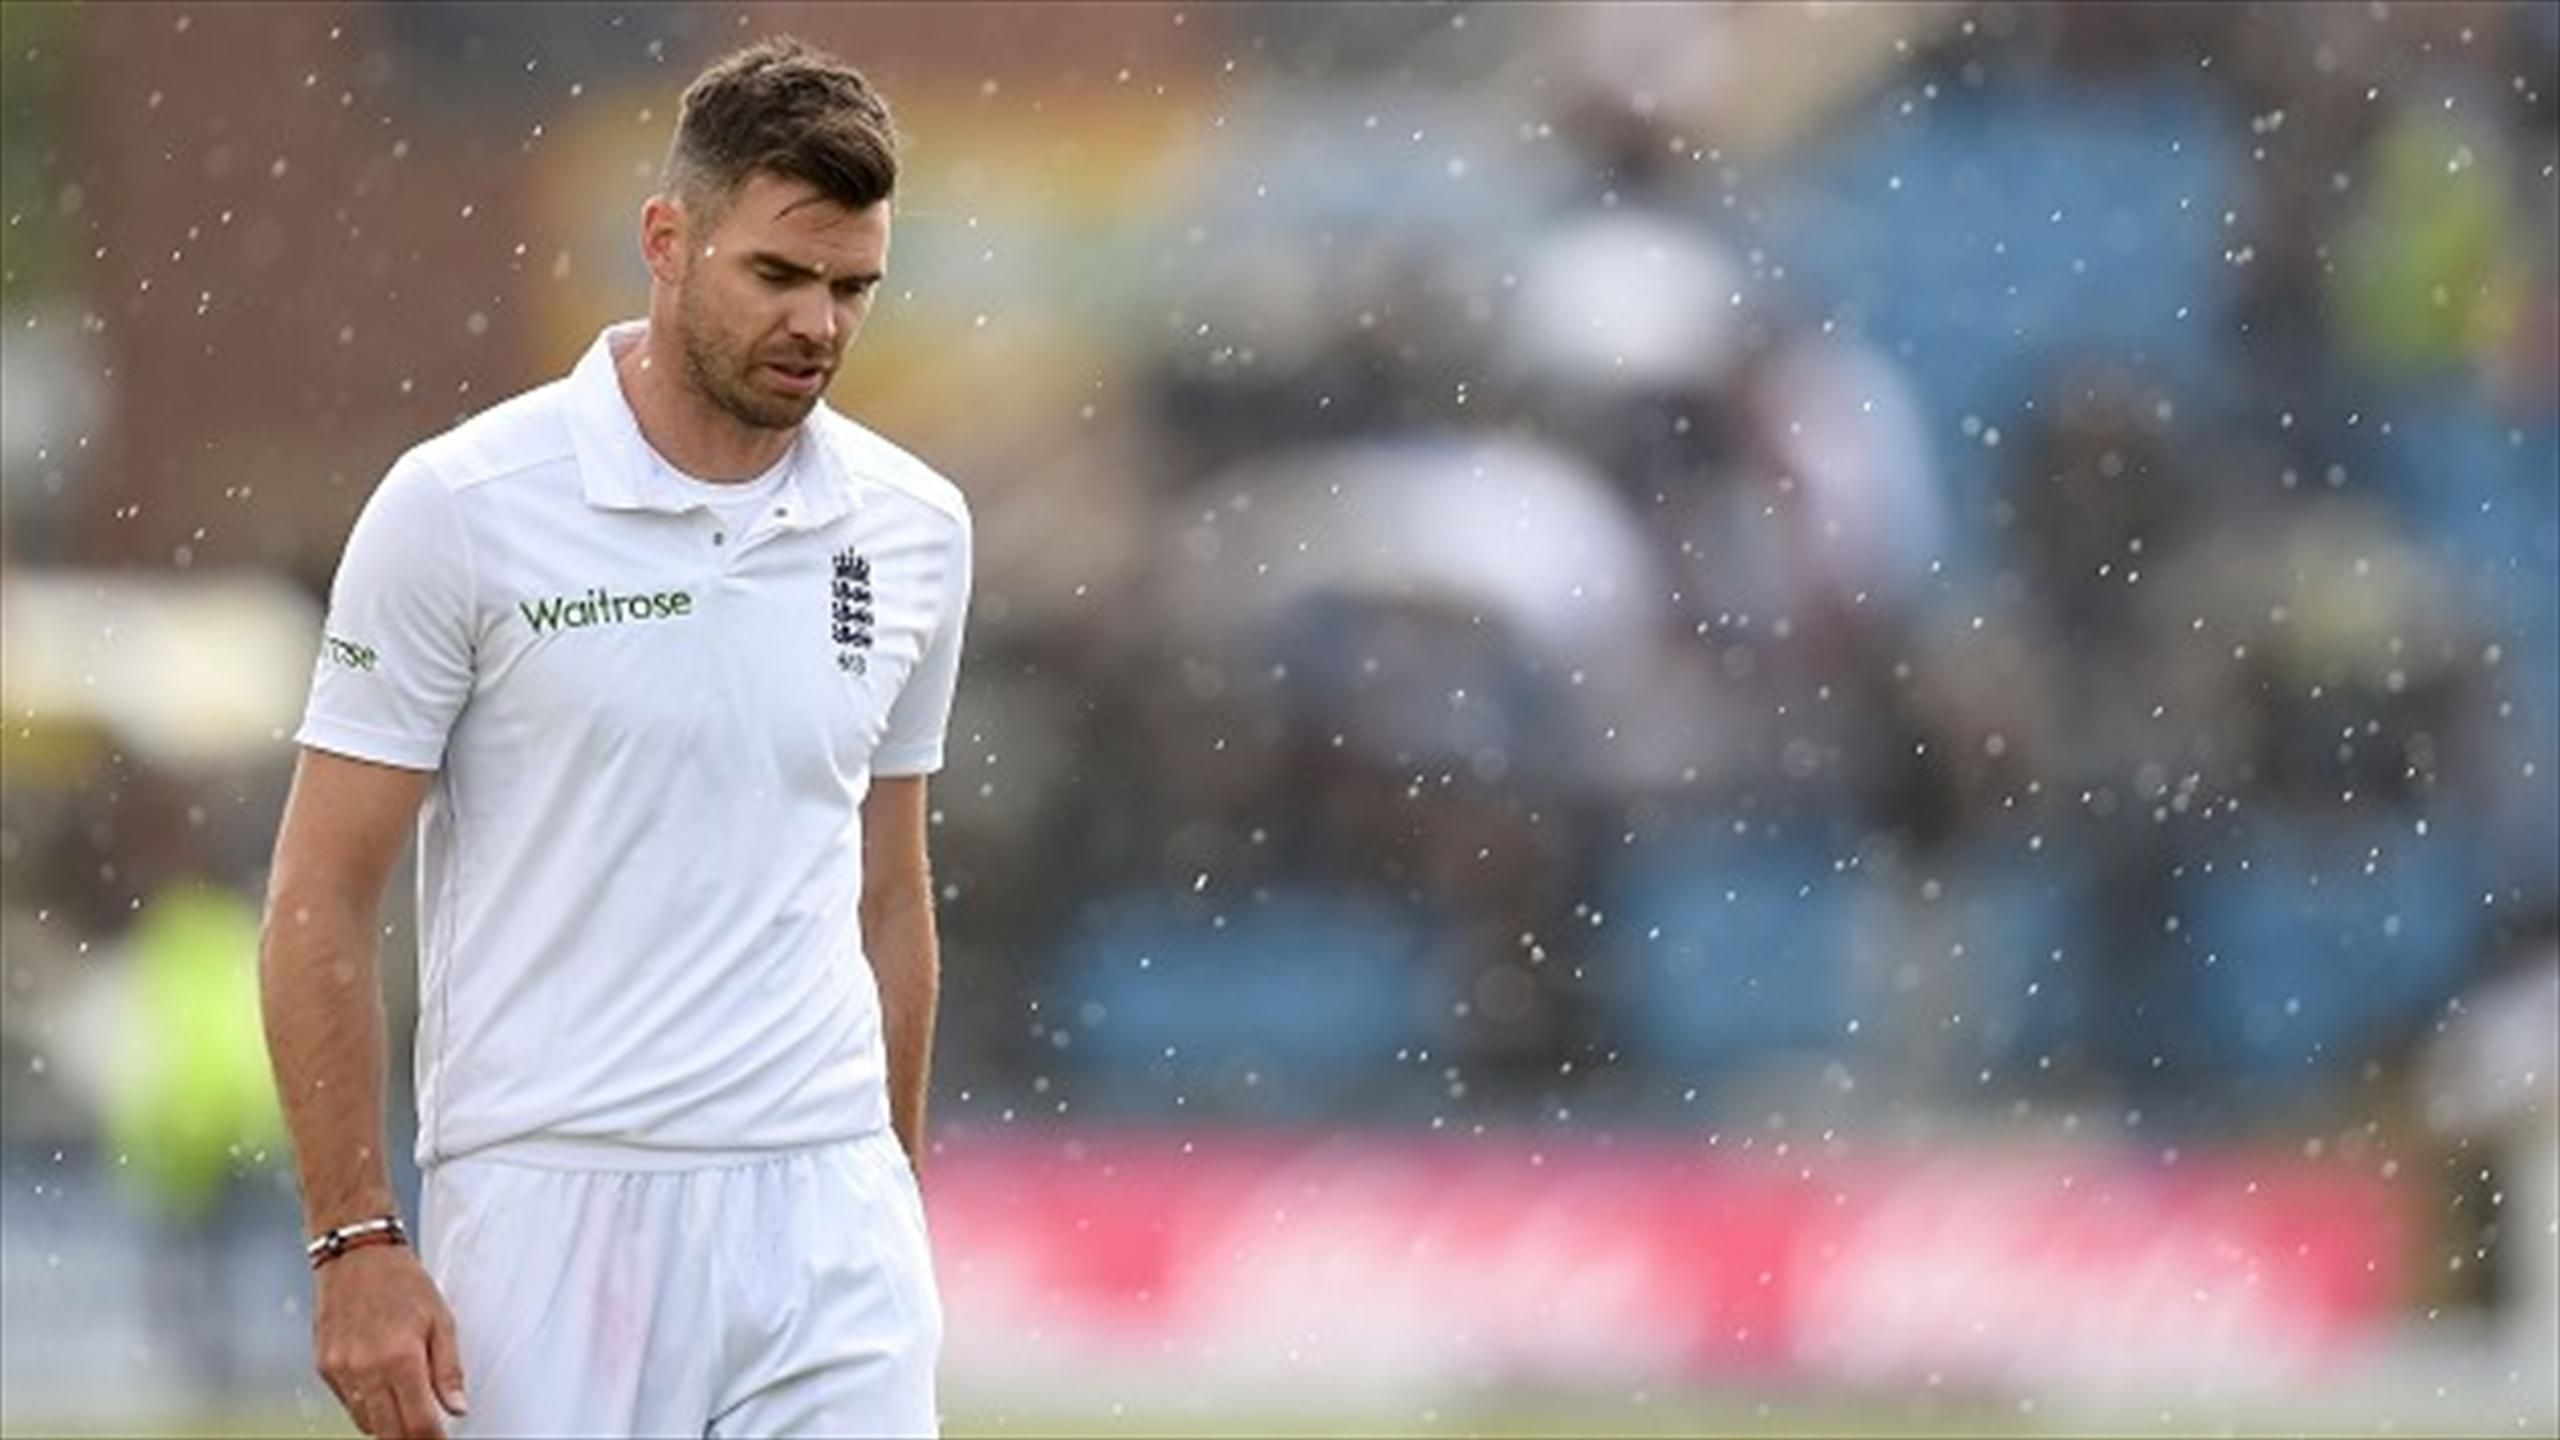 James Anderson recall will be a gamble, says England captain